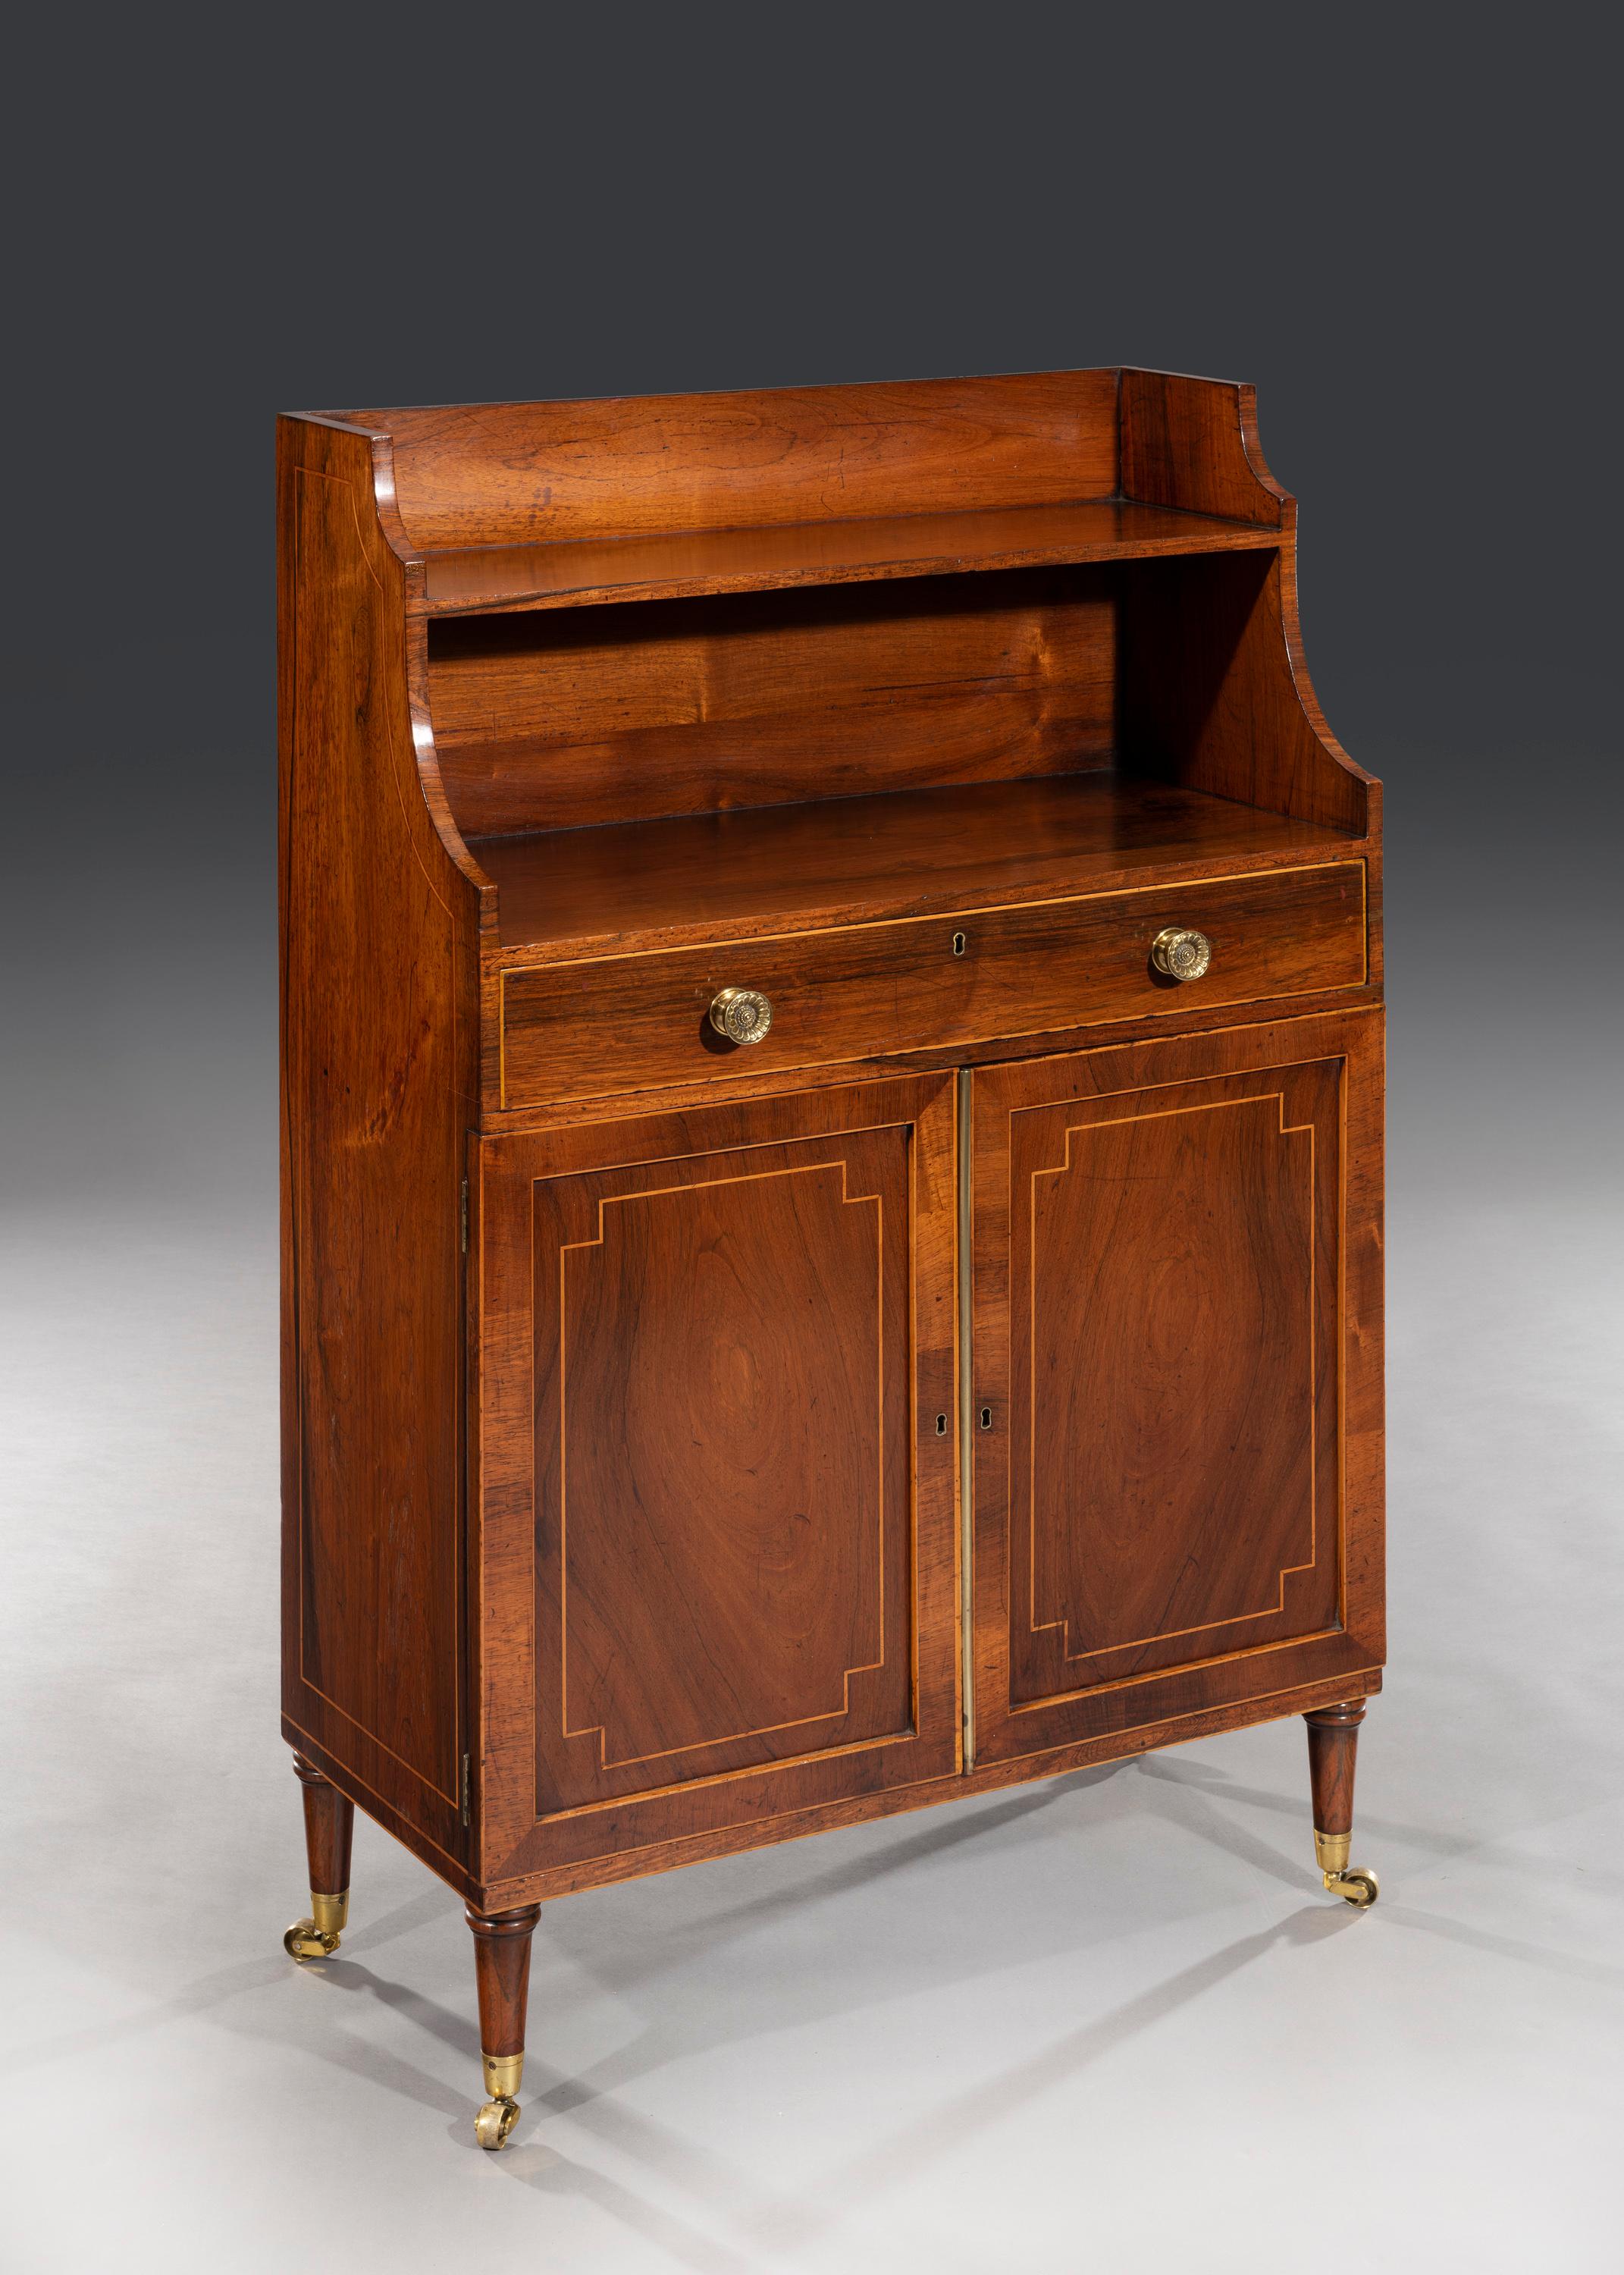 The rosewood veneered waterfall bookcase sits above a single full length drawer with brass handles. The drawer lining is mahogany and the cupboard doors are inset with 